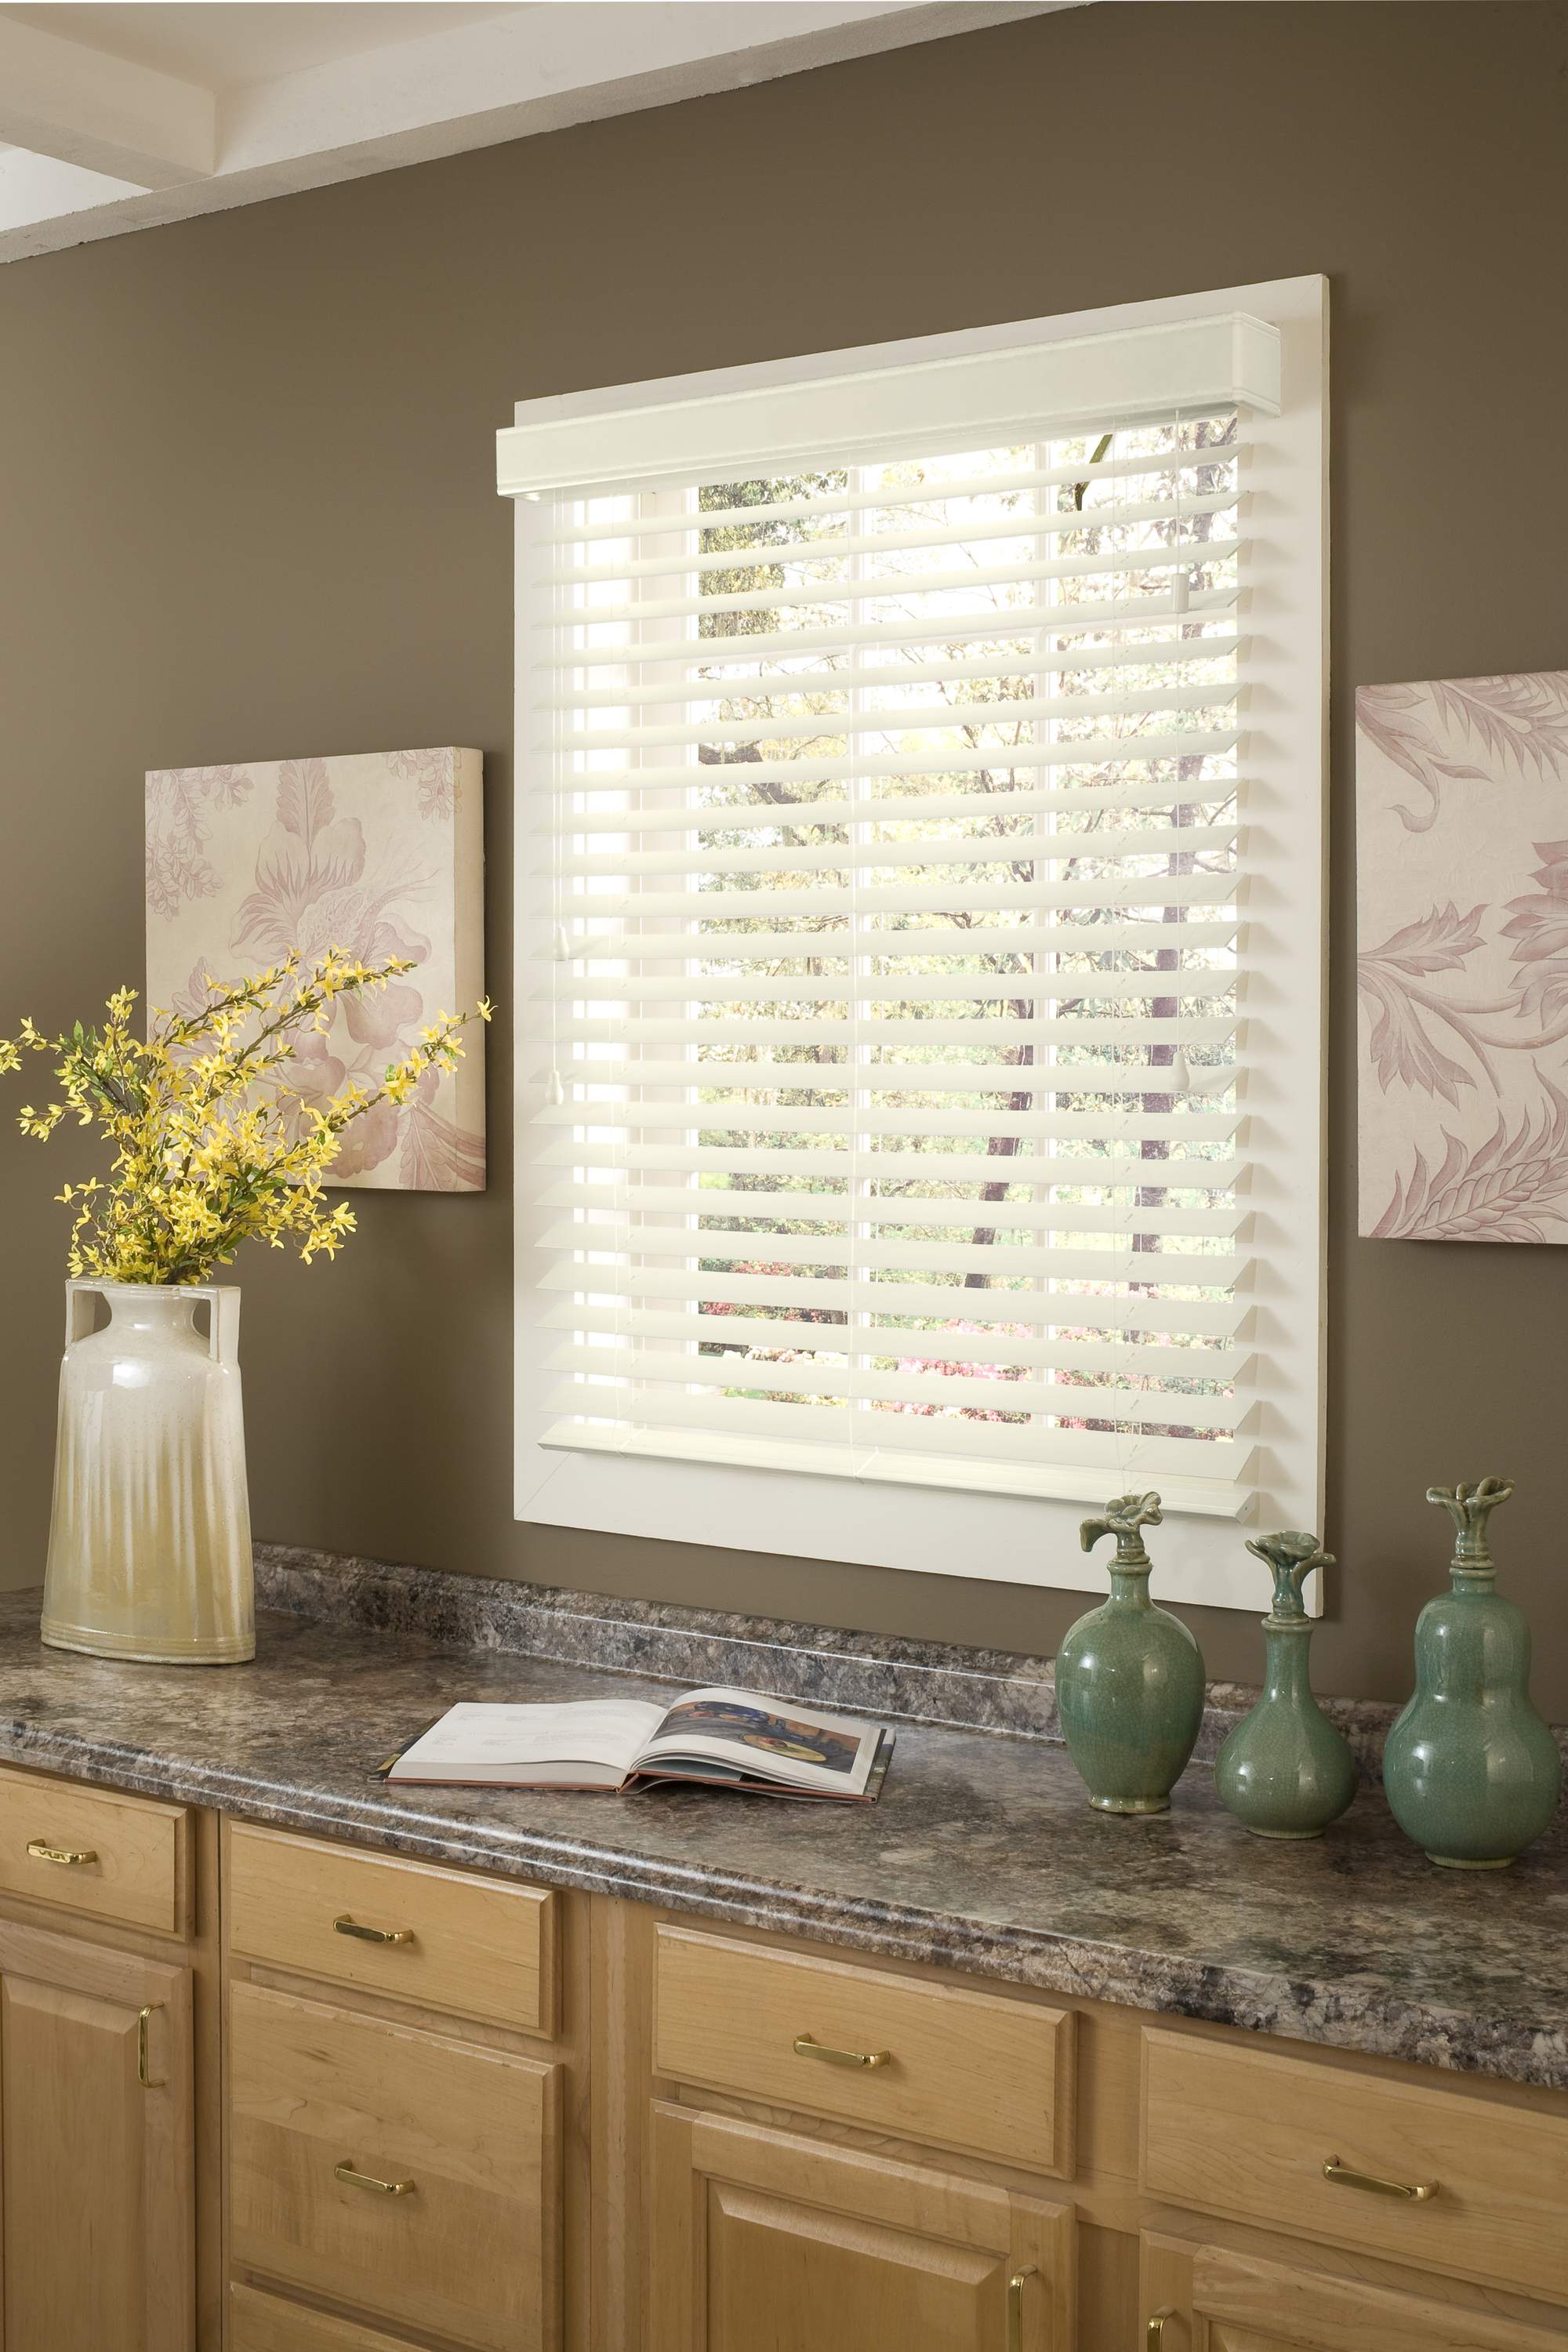 Richfield Studios 2" Faux Wood Blinds, Off White - image 1 of 5